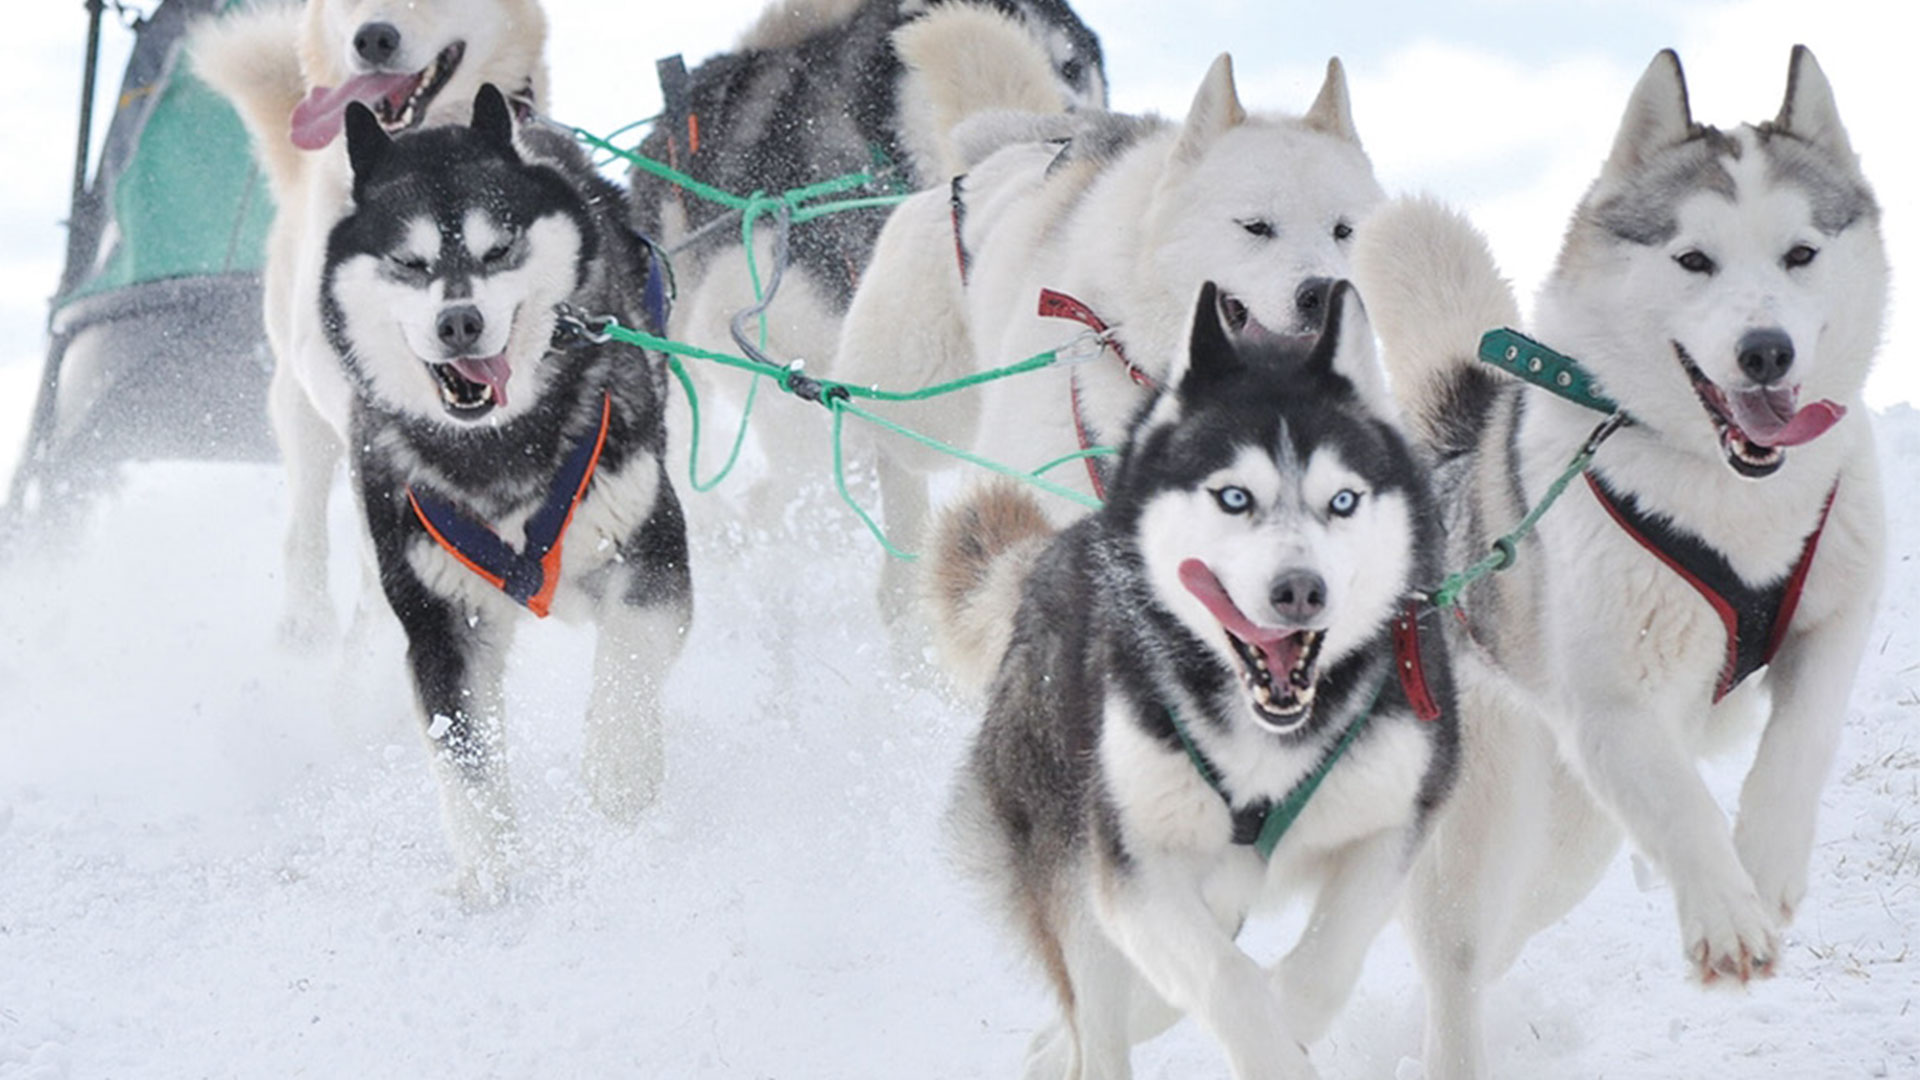 Working towards common goals, huskies pulling a sledge together